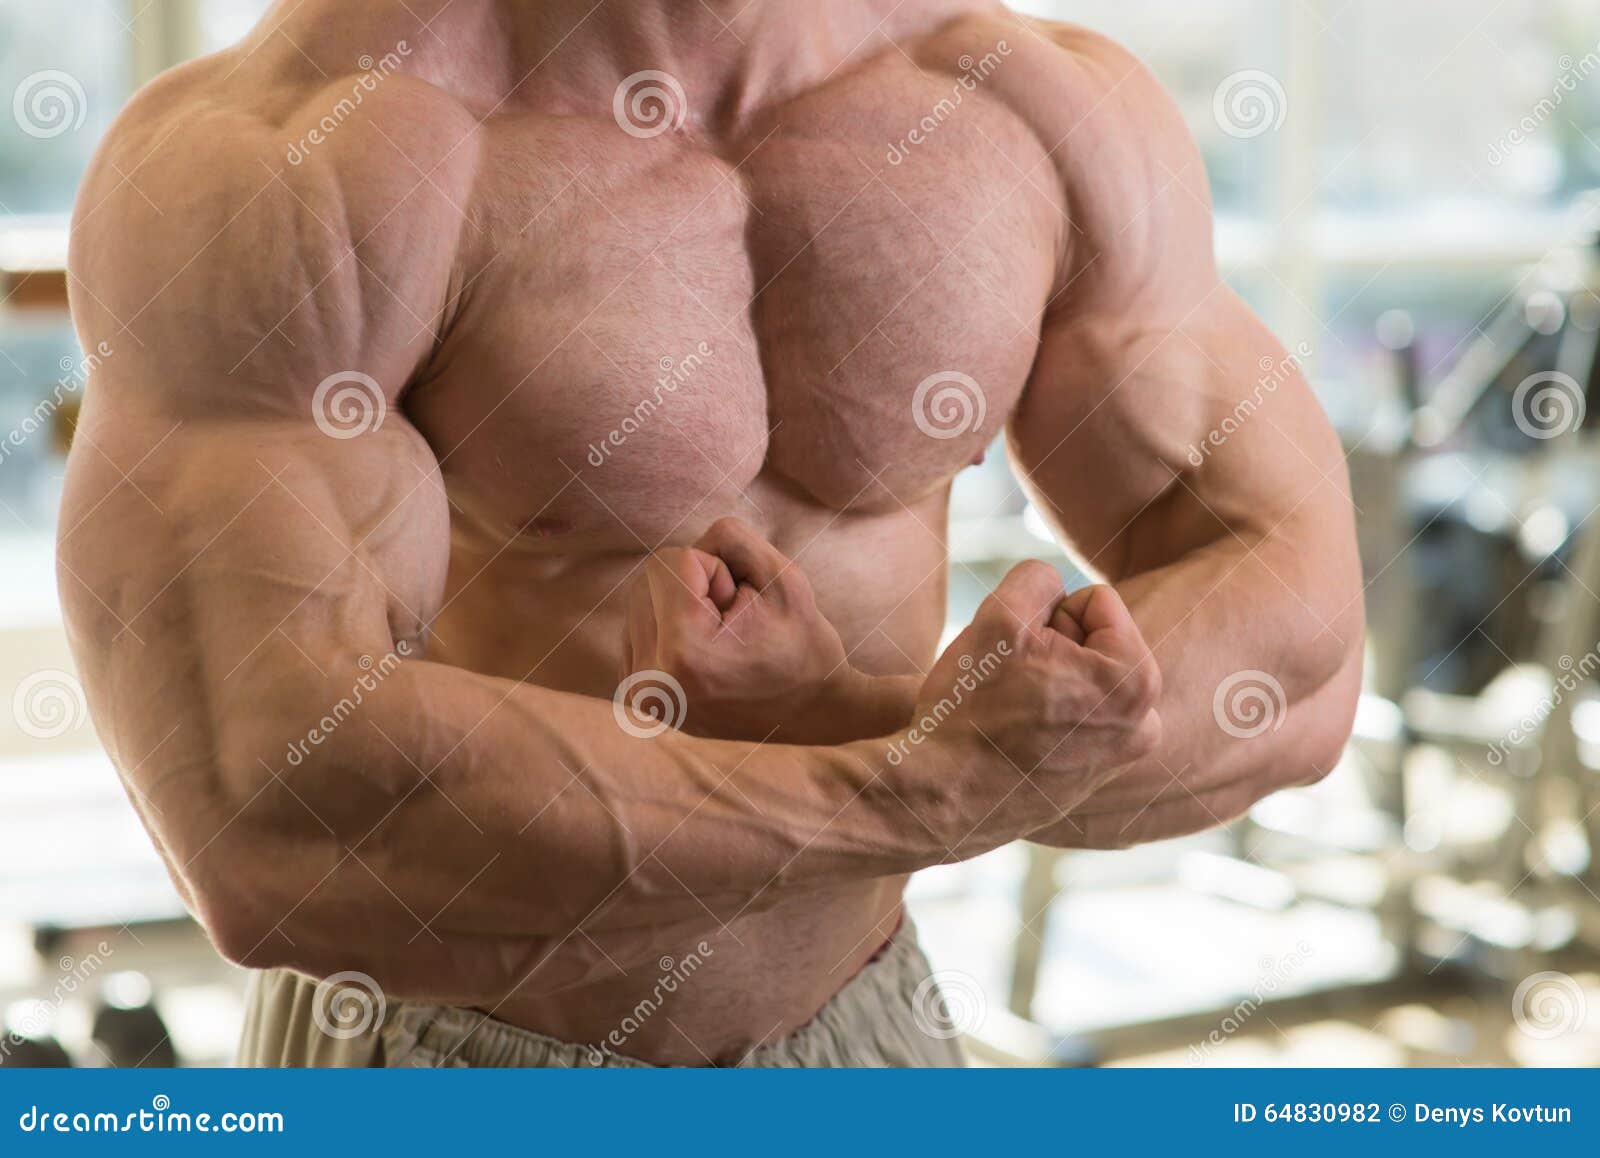 Muscular Torso Stock Photo Image Of Efficacy Ripped 64830982